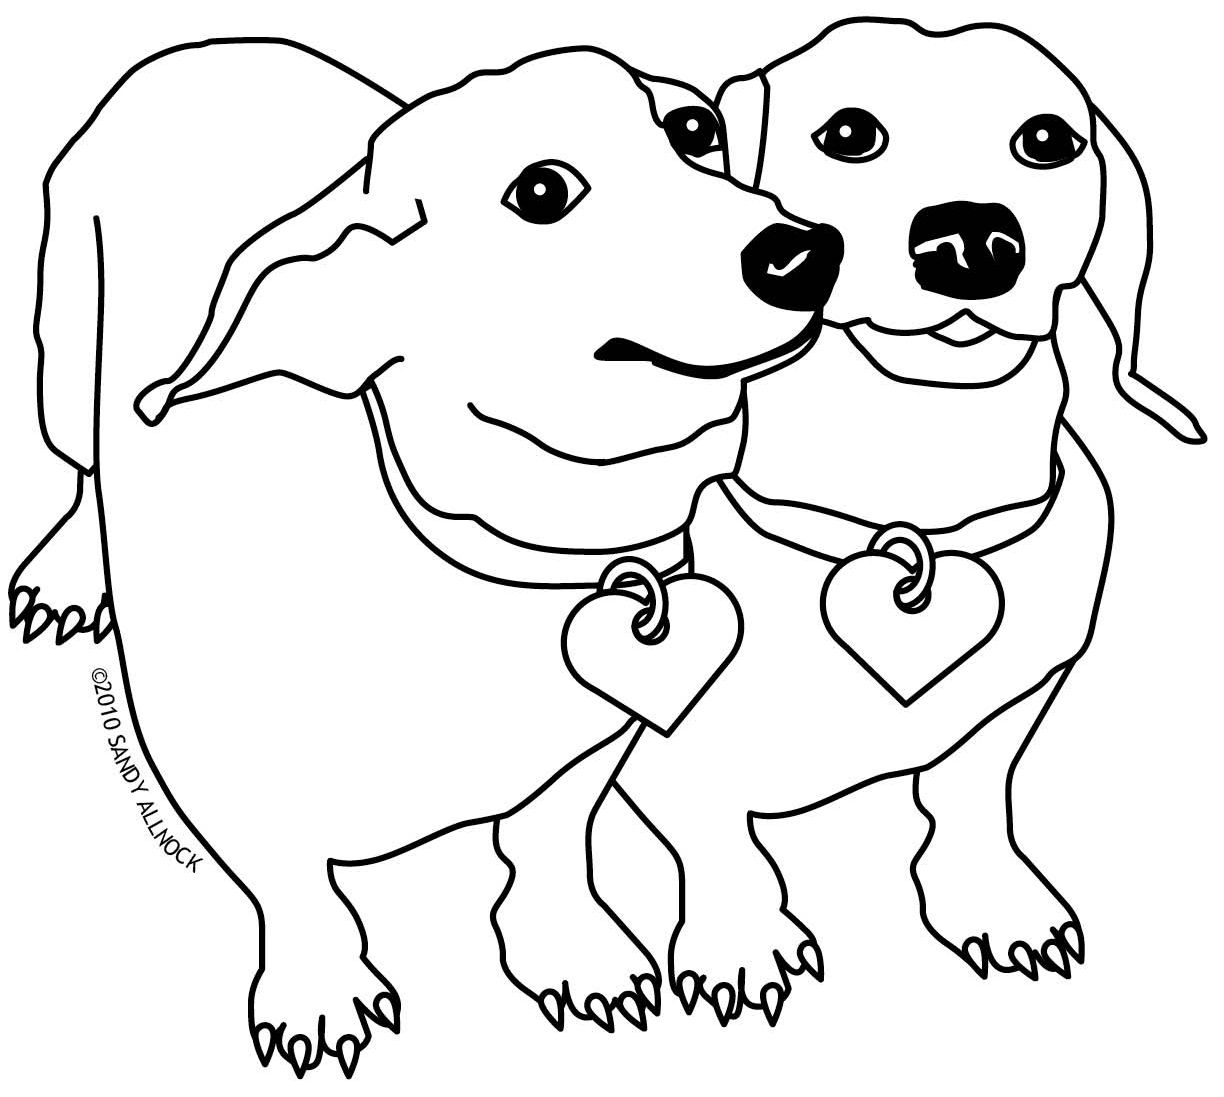 It's a colourful world: Long wait for lil pups | Dog coloring page, Dog  coloring book, Dog template